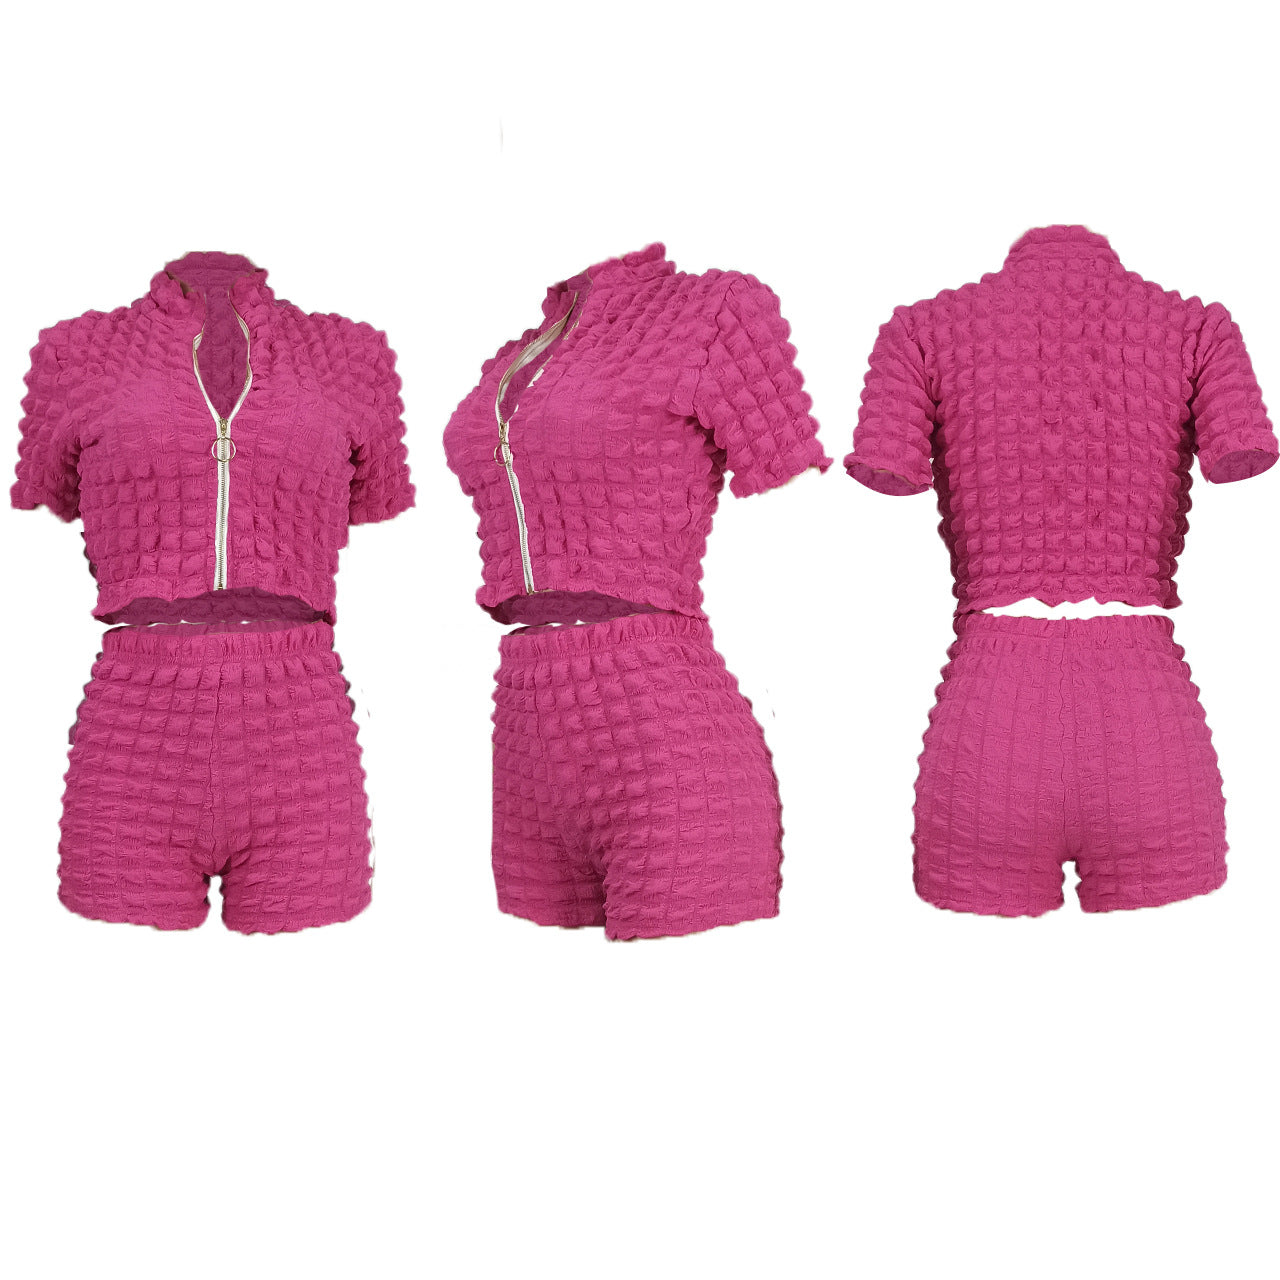 Zip Cropped Summer Top And Short Sets For Women